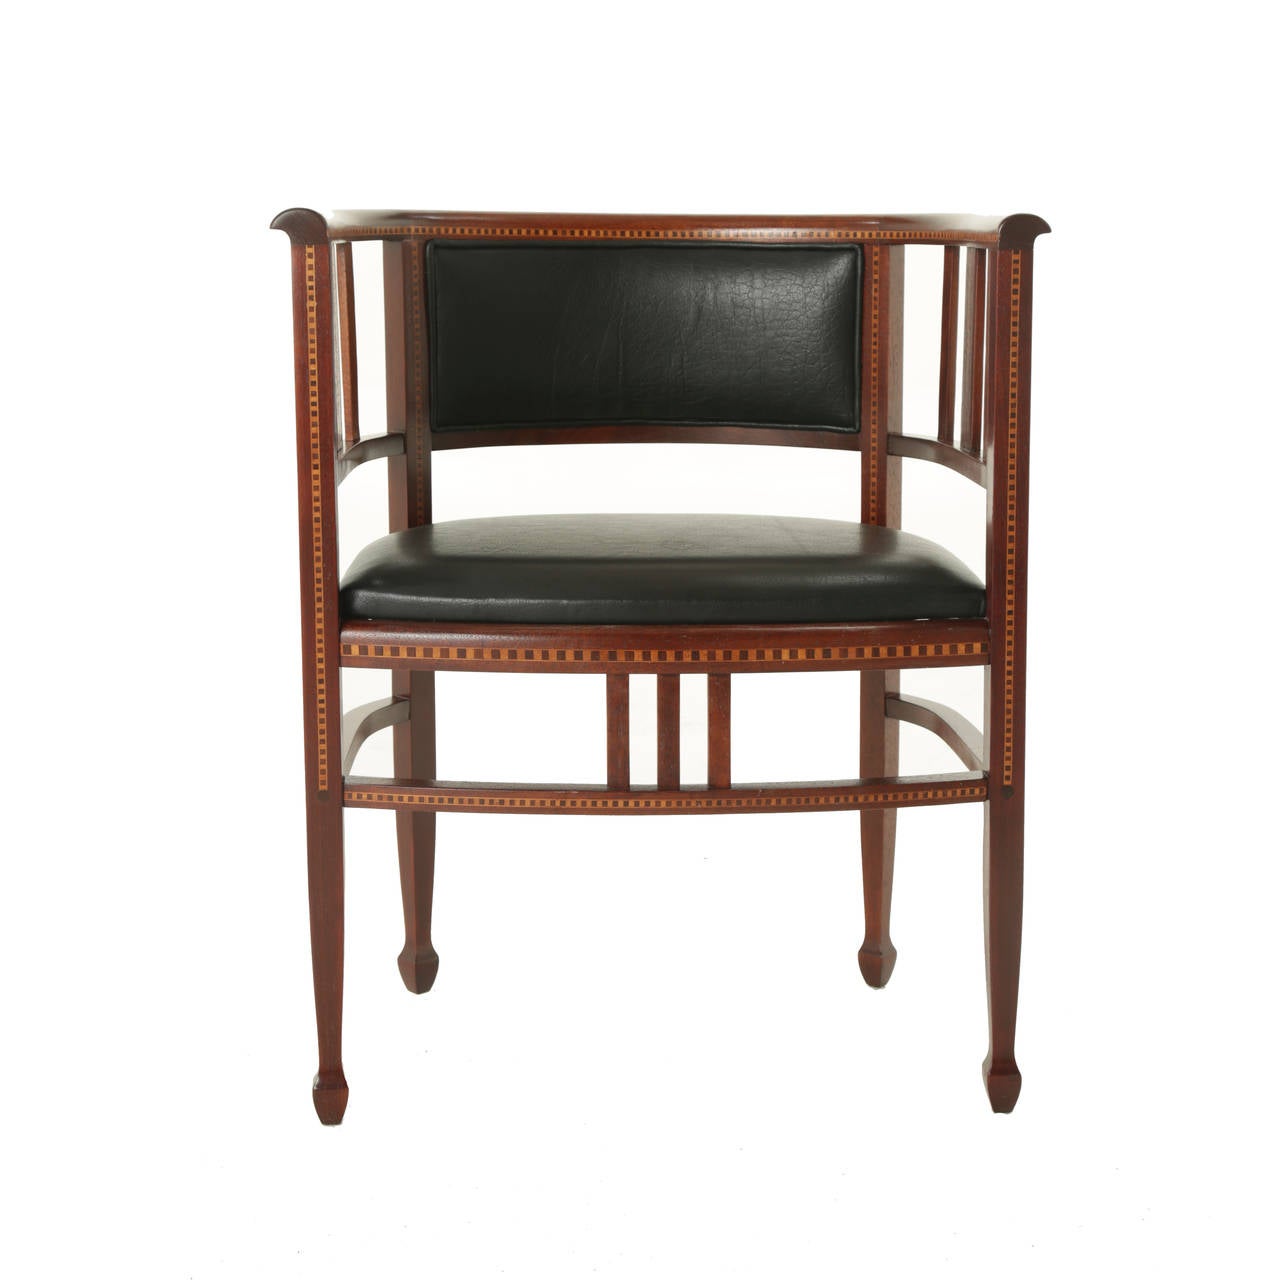 Lacquered Brazilian Exotic Hardwood Chair with Sculpted Feet and Geometric Inlay For Sale